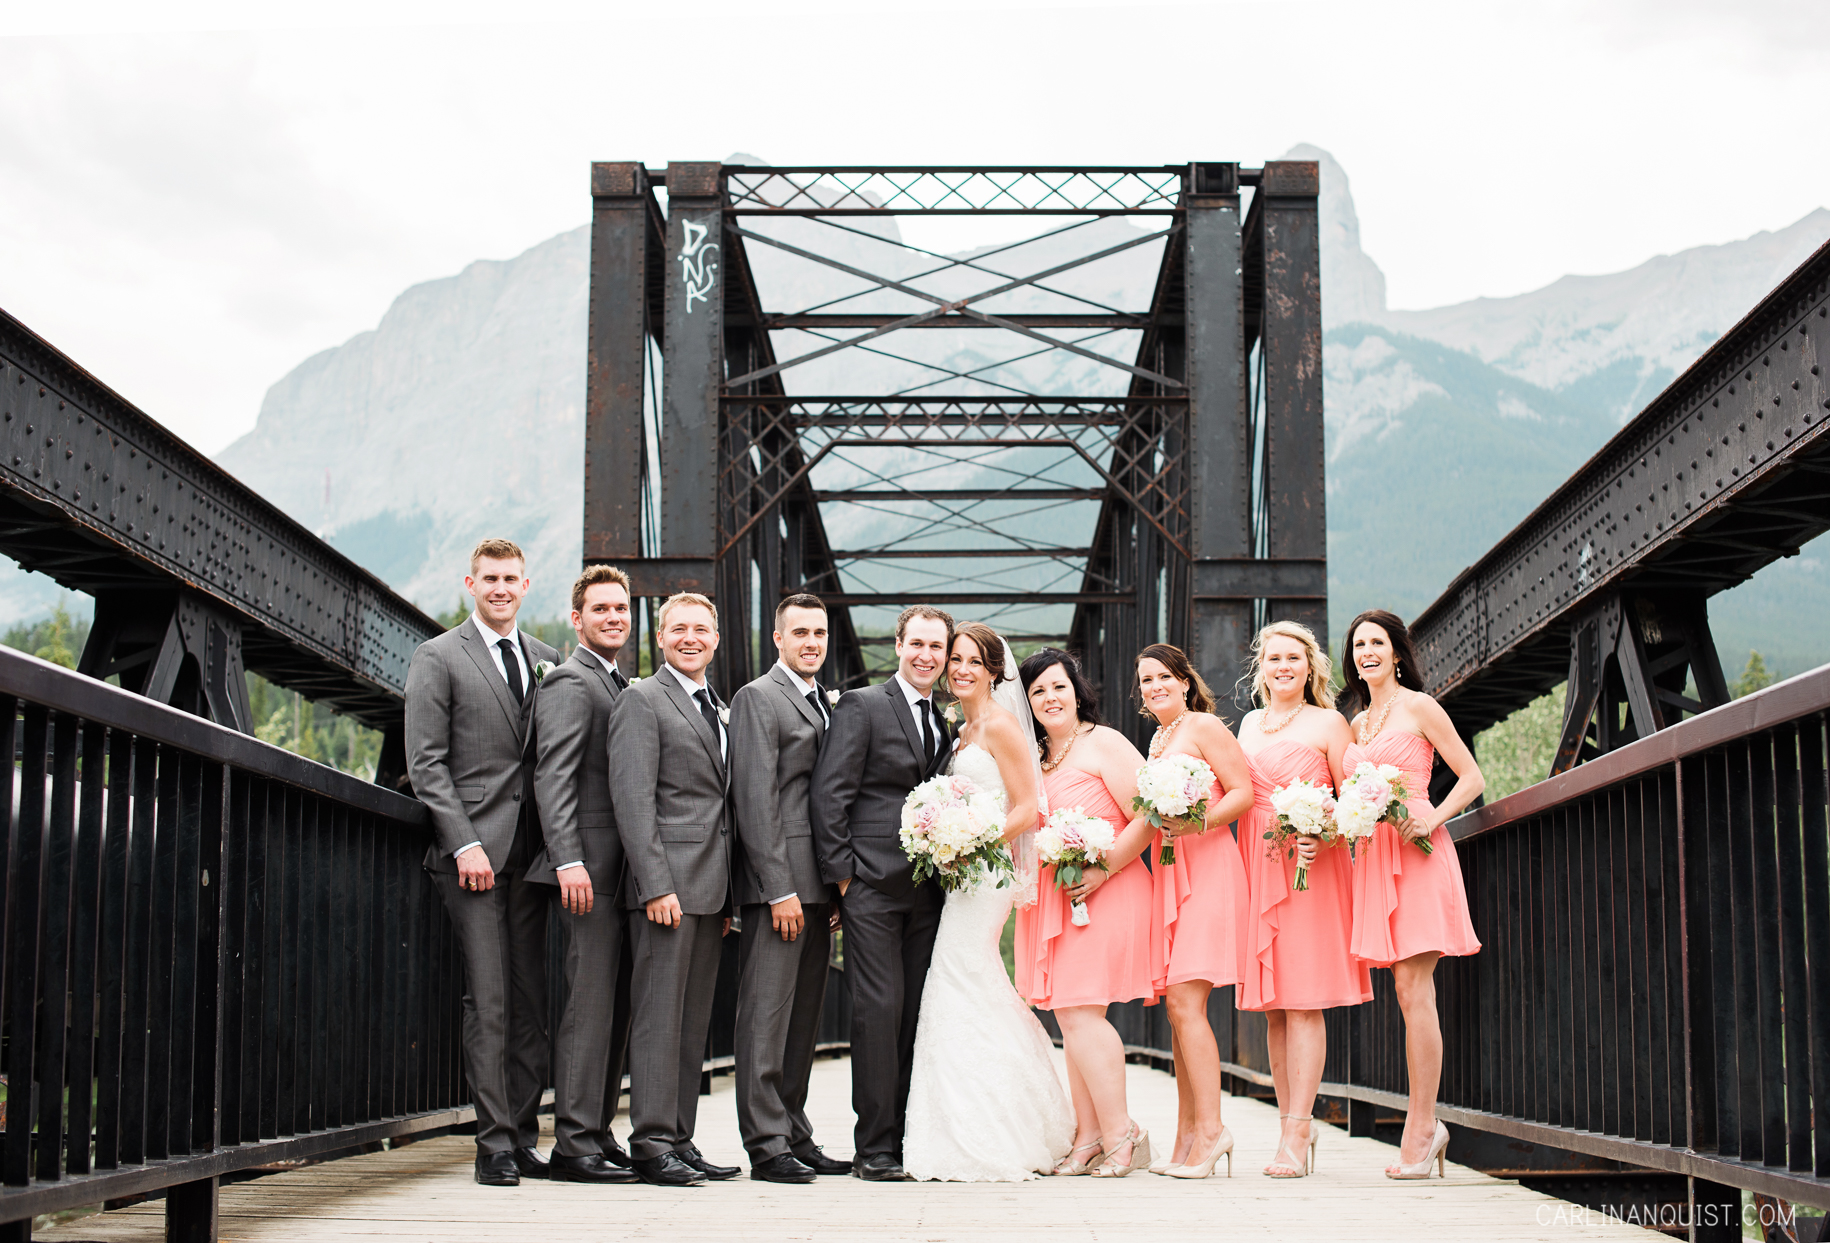 Coral Bridesmaids Dresses | Canmore Wedding Photographers